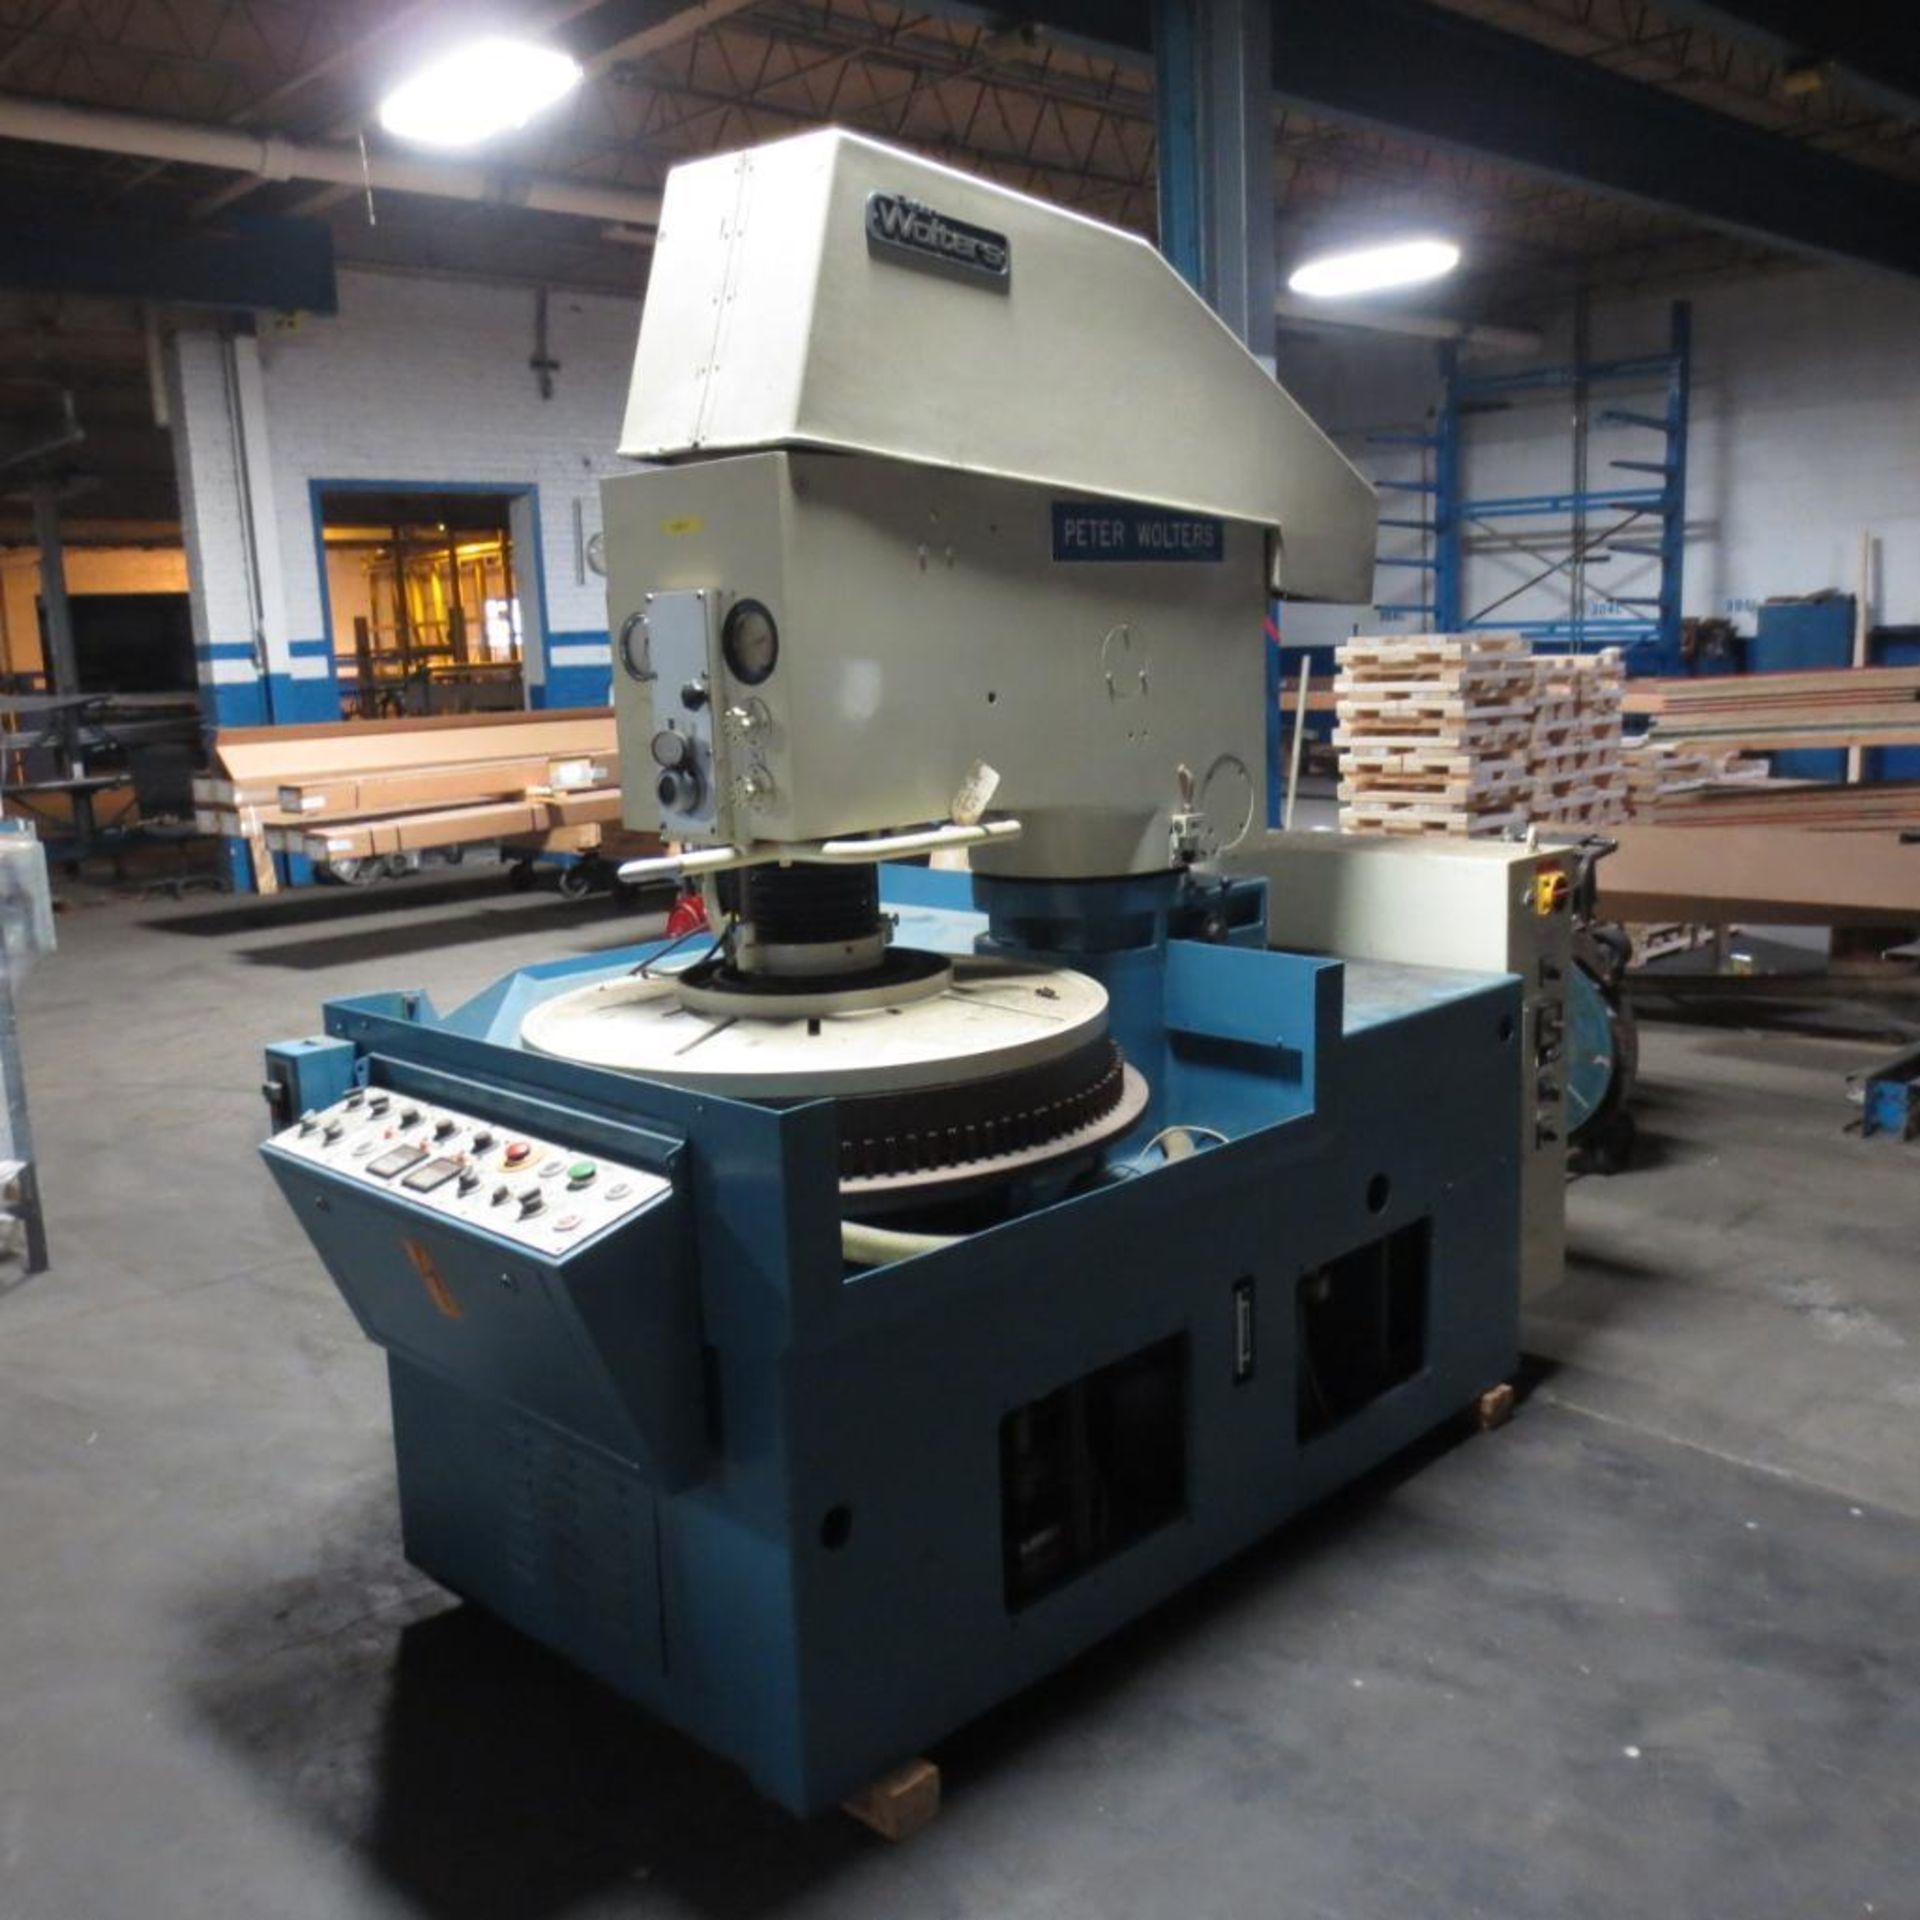 Peter Wolters 30" Type AL2 Rotary Lapping Machine S/N: 366, 3-KW Spindle Drive. Loading Fee is $550. - Image 4 of 6